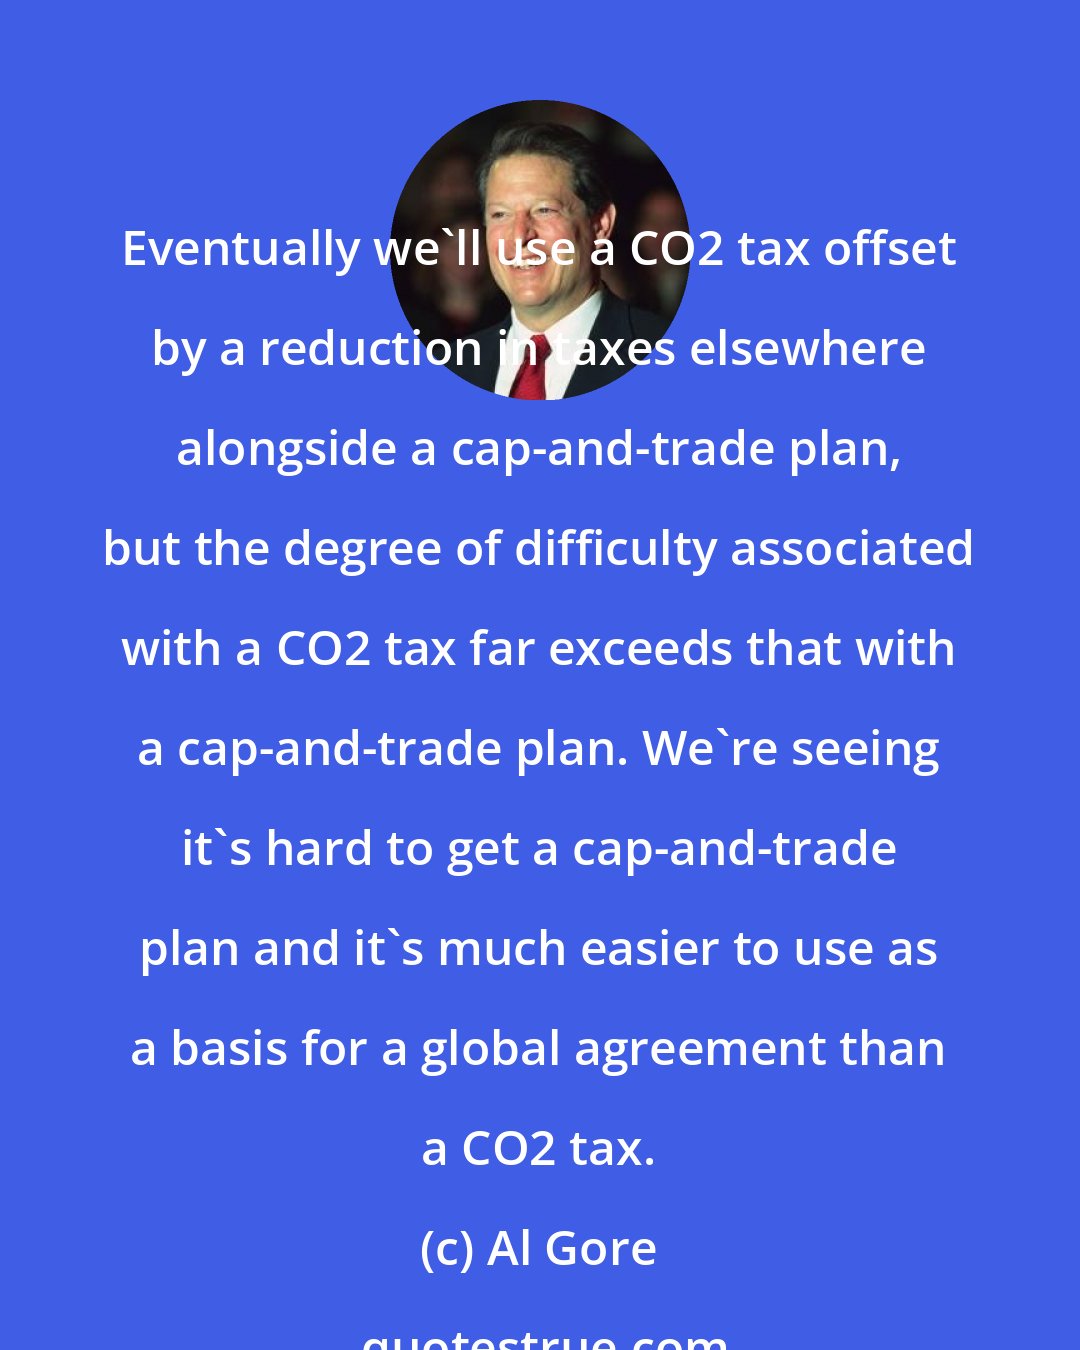 Al Gore: Eventually we'll use a CO2 tax offset by a reduction in taxes elsewhere alongside a cap-and-trade plan, but the degree of difficulty associated with a CO2 tax far exceeds that with a cap-and-trade plan. We're seeing it's hard to get a cap-and-trade plan and it's much easier to use as a basis for a global agreement than a CO2 tax.